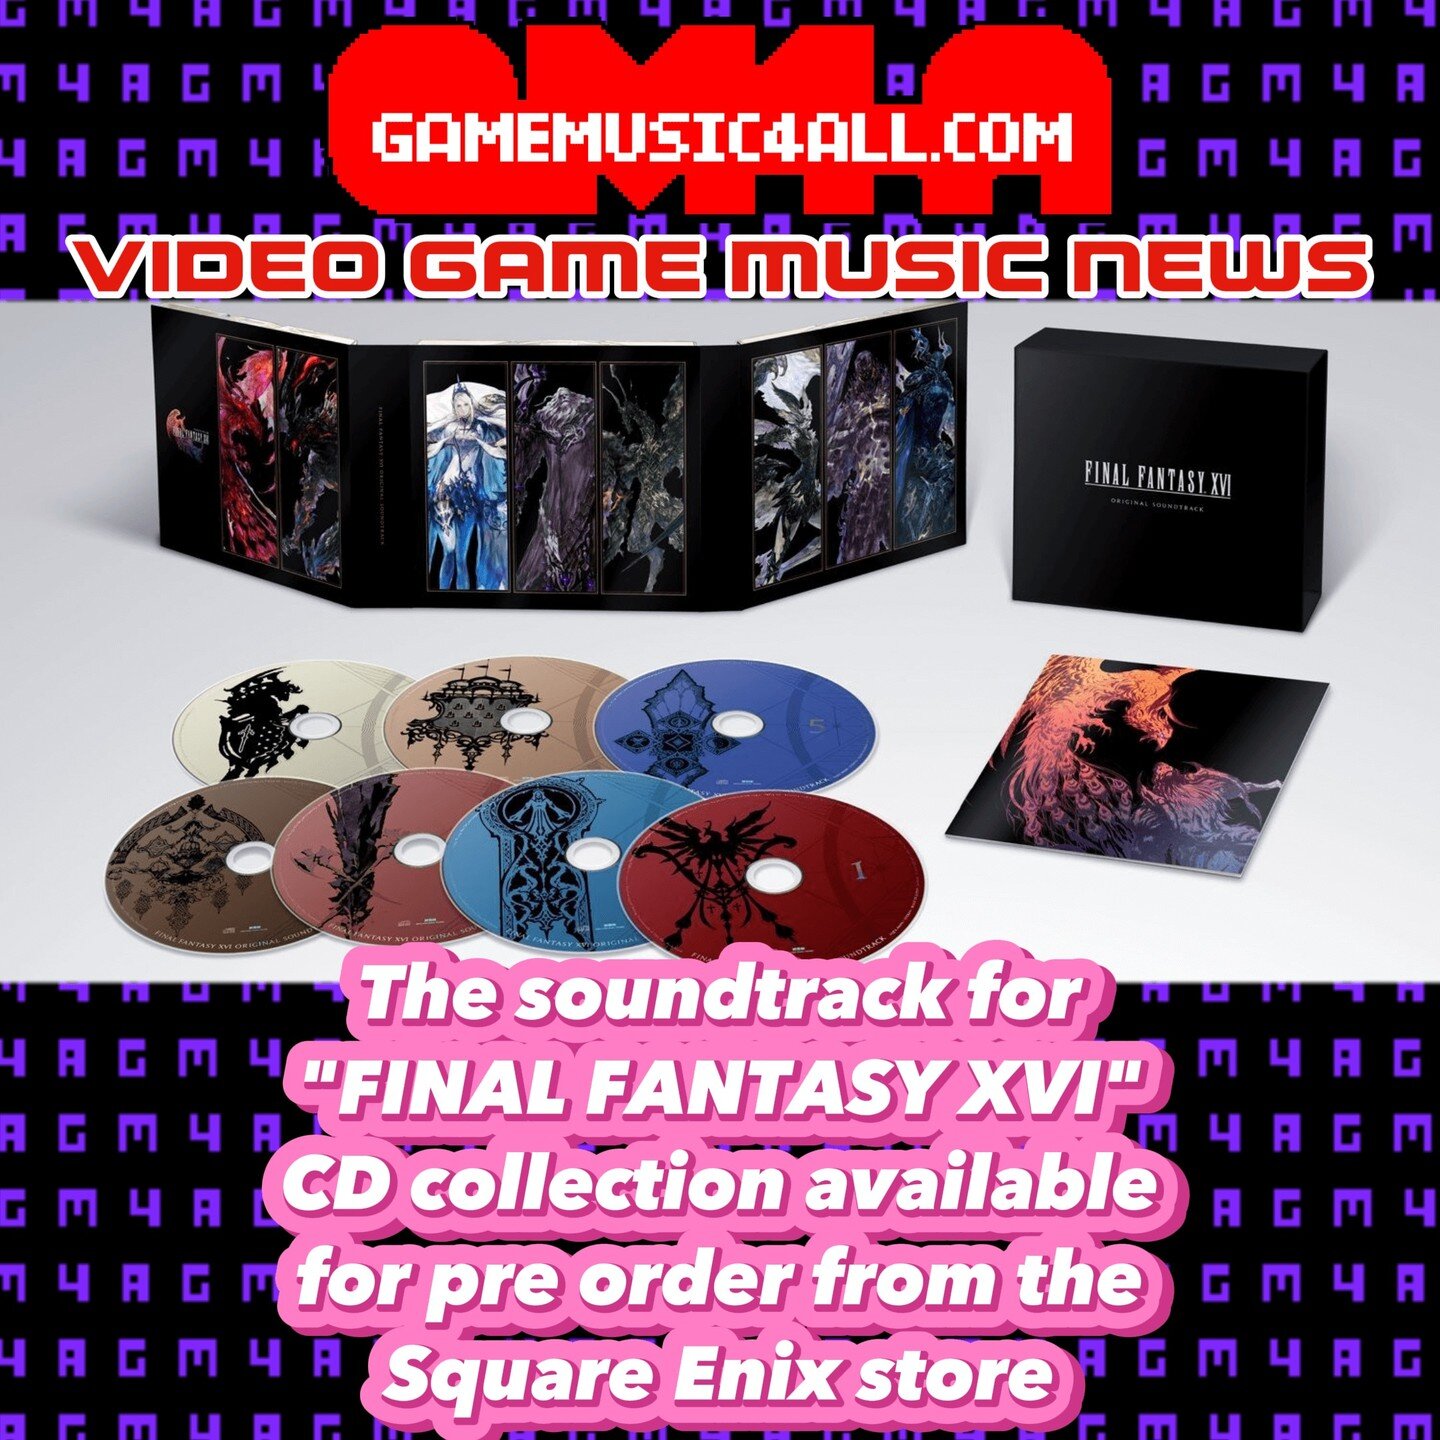 Merch preorder! The soundtrack for &quot;FINAL FANTASY XVI&quot; CD collection available for Pre-order from the Square Enix store. @squareenix Link in bio!
Find more info and gaming news at: gamemusic4all.com/vgmnews

#VGM #gamemusic #videogamemusic 